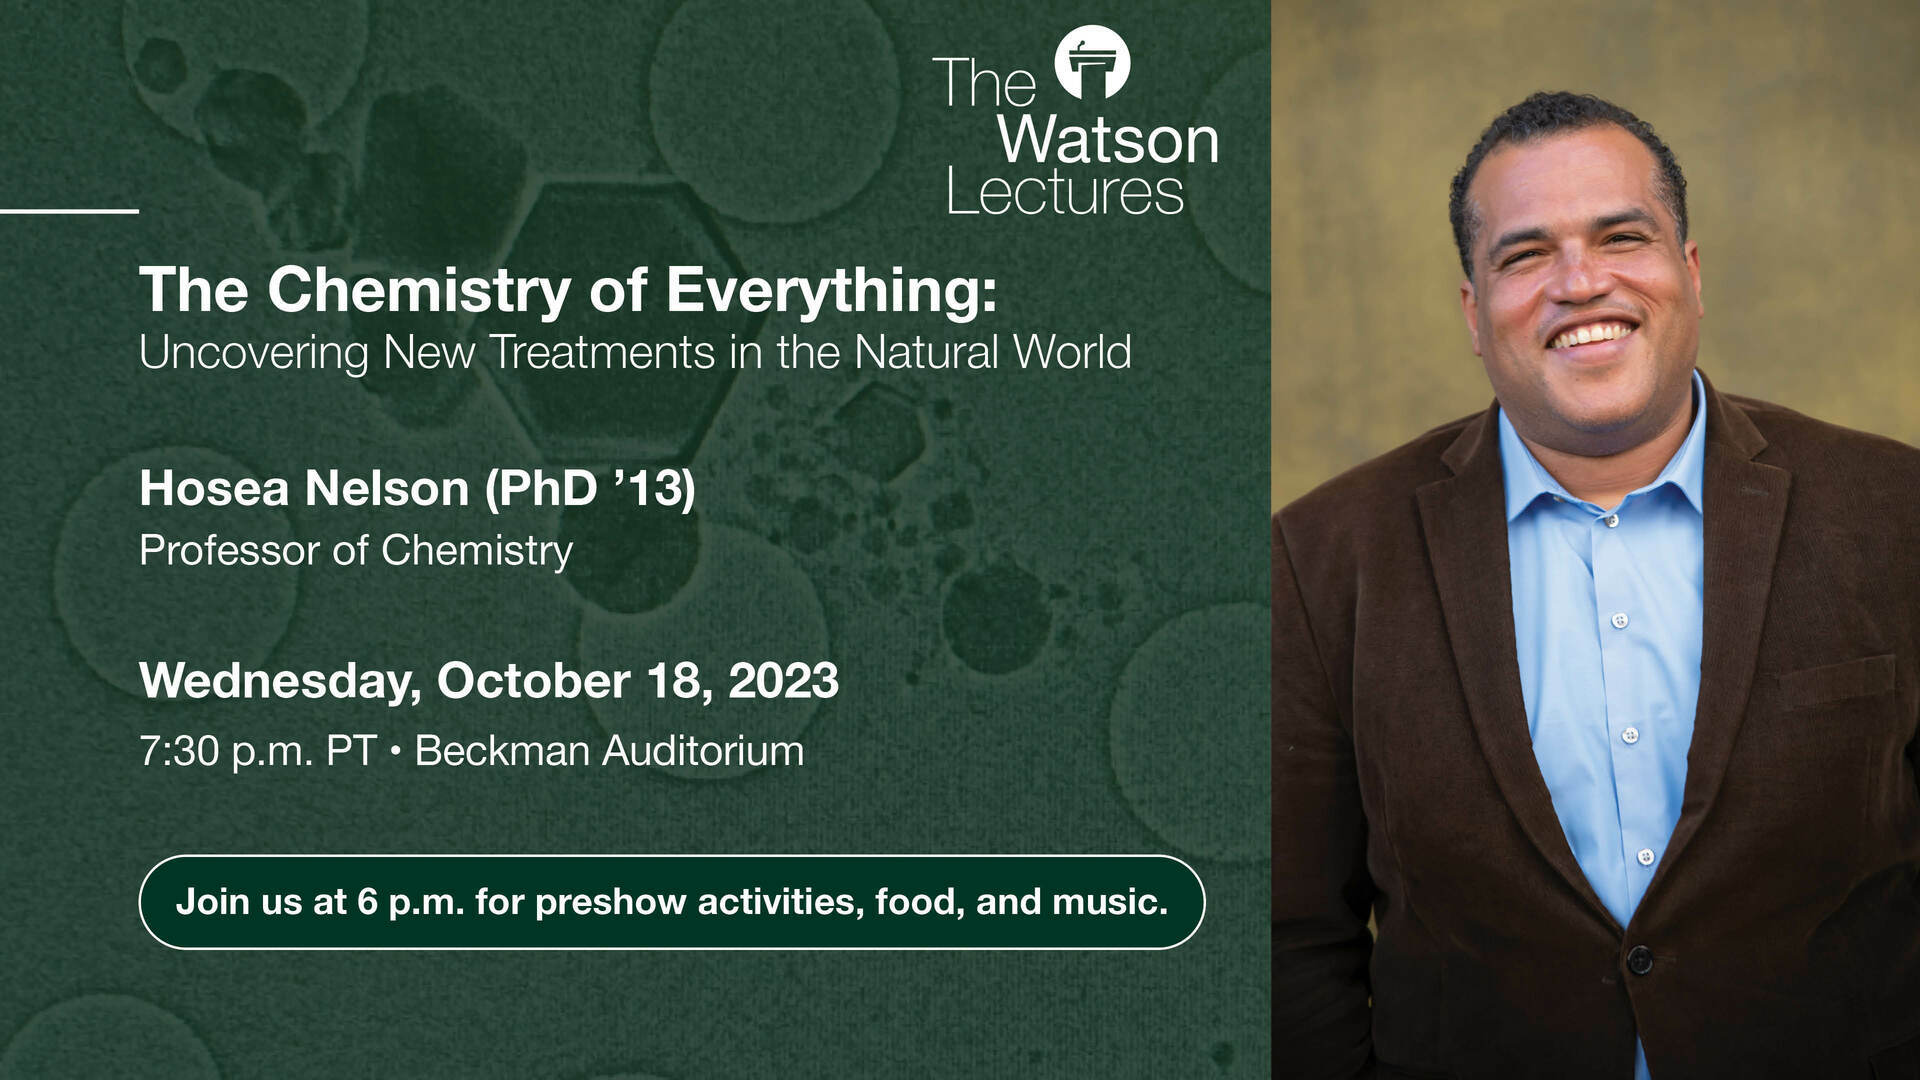 The Chemistry of Everything: Uncovering New Treatments in the Natural World, Pasadena, California, United States